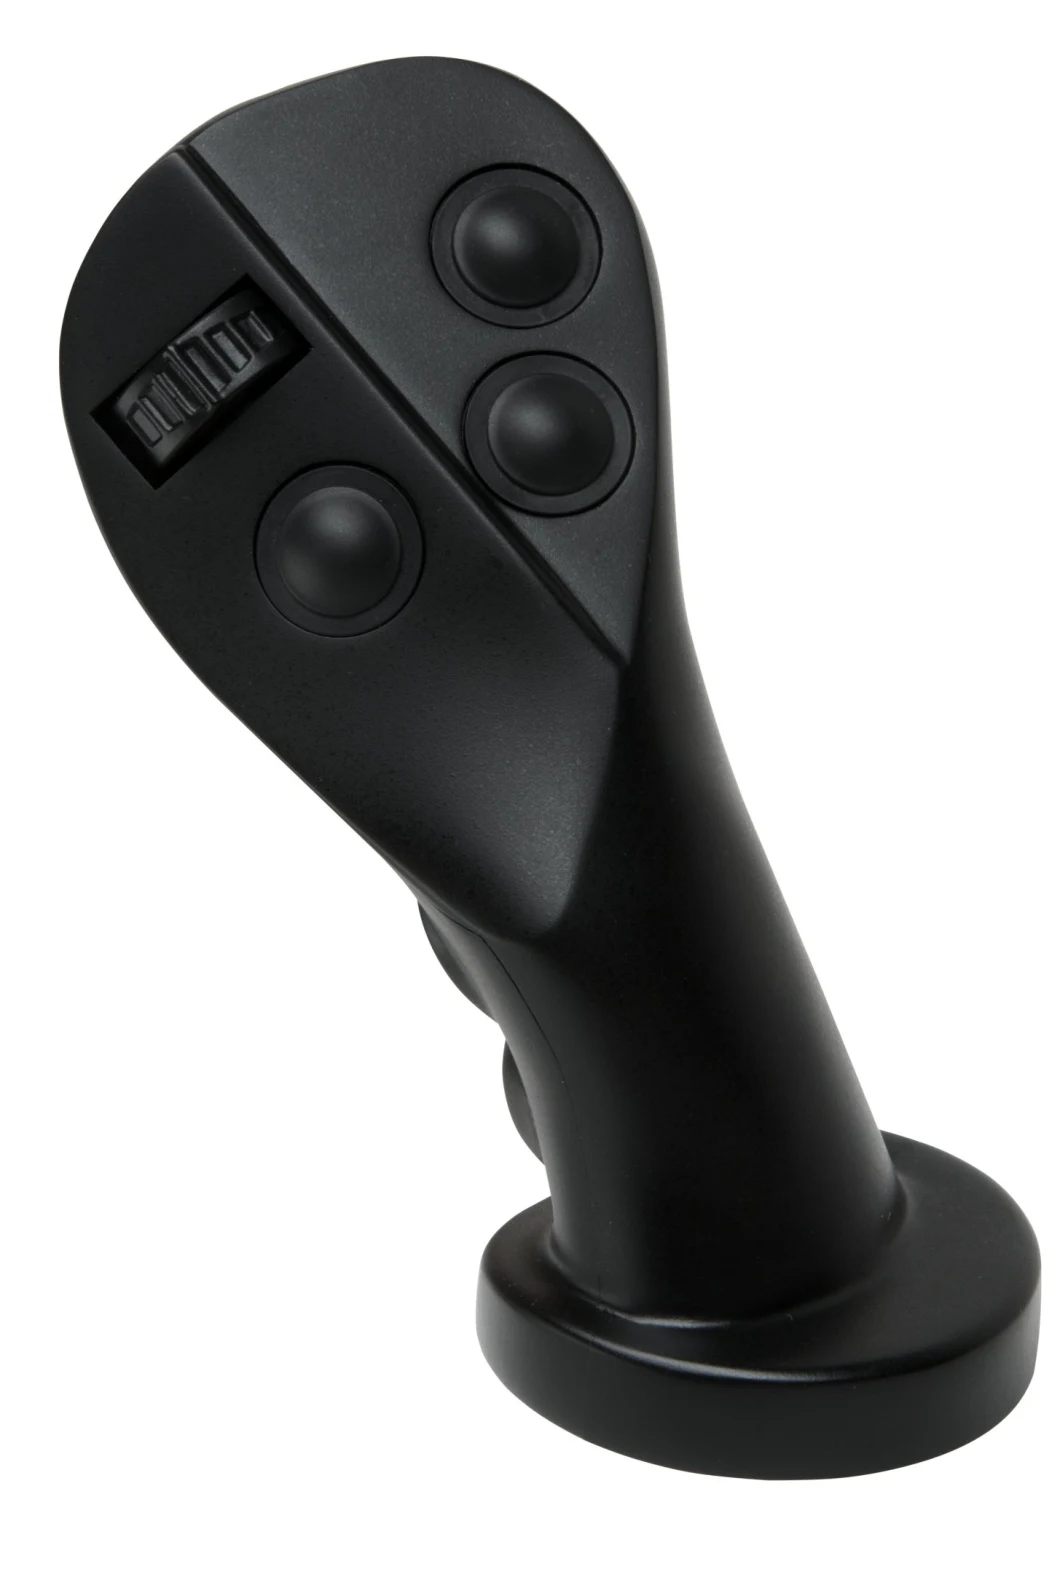 Selling Joysticks Wireless Industrial Remote Control for Concrete Pump Truck